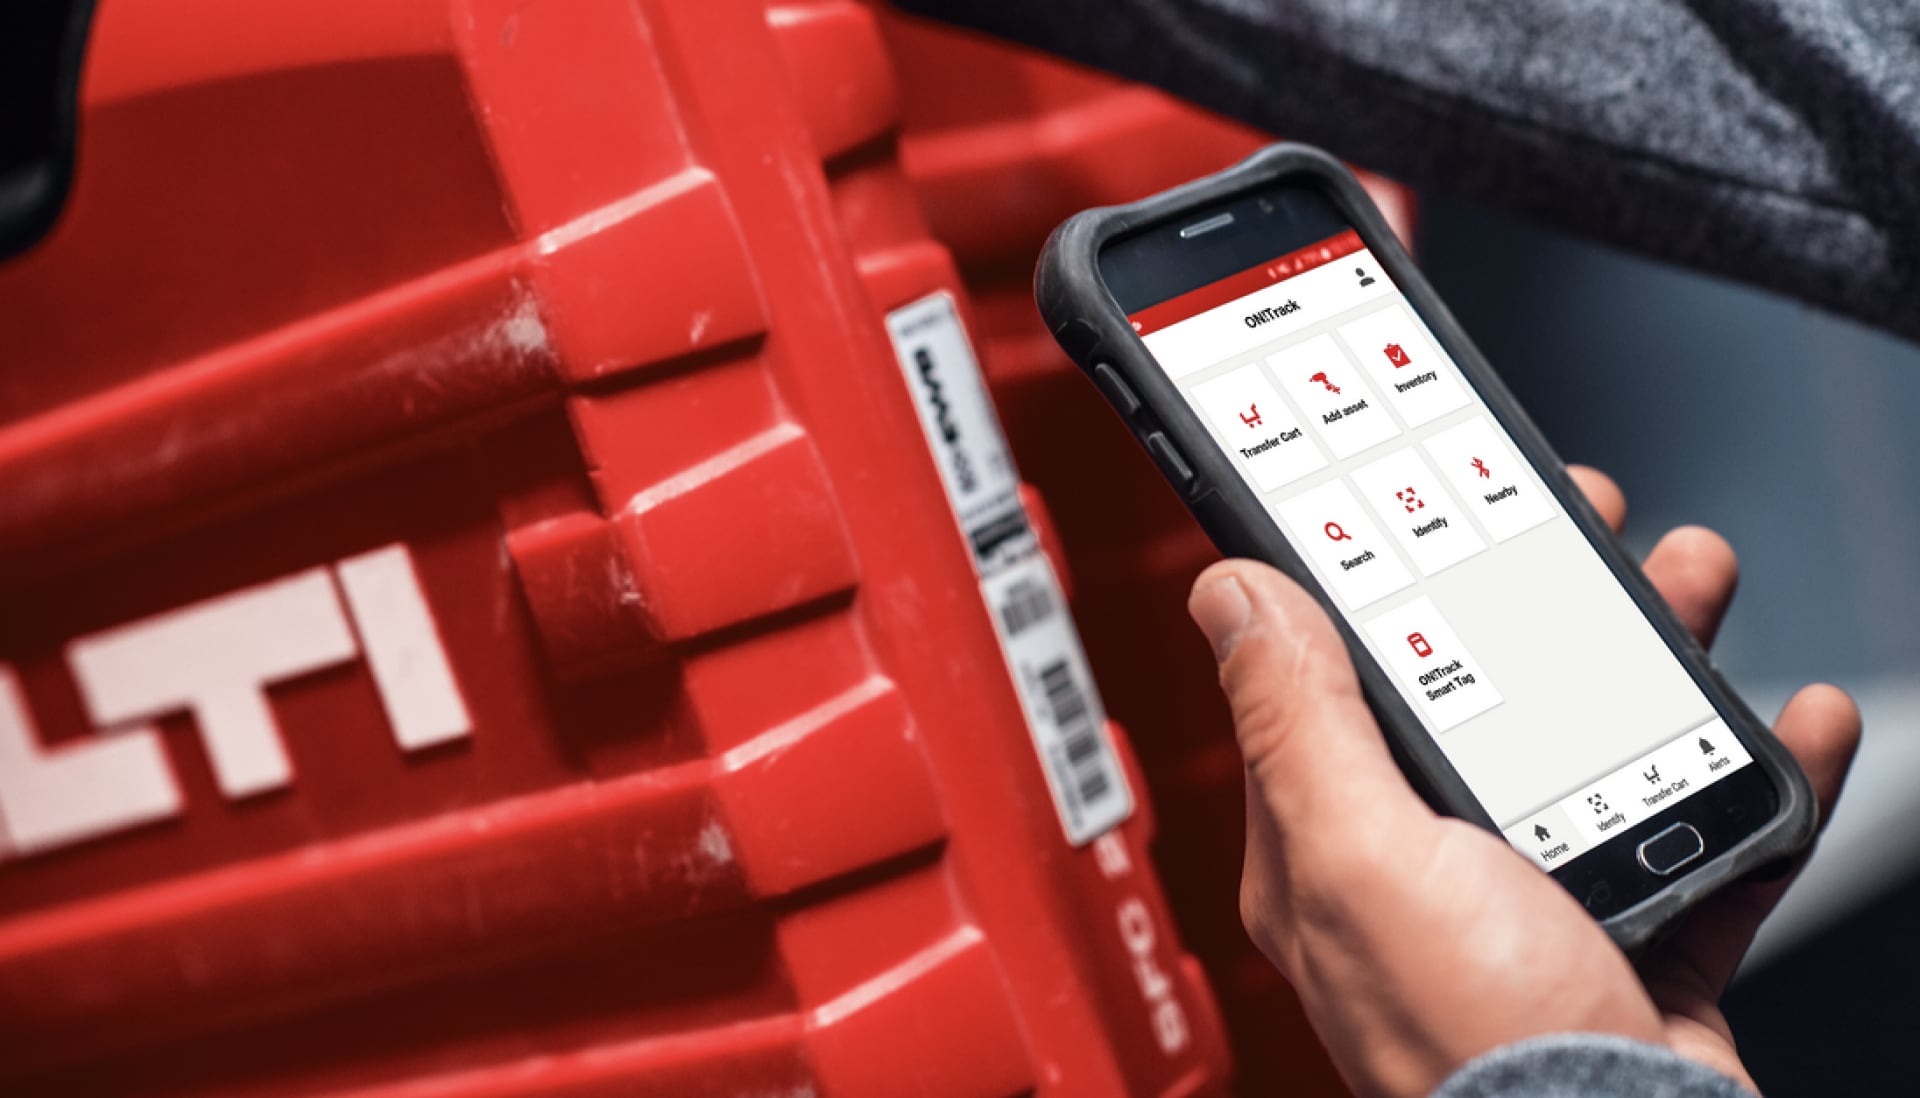 a man uses ON!Track on a mobile device to scan a hilti tool box